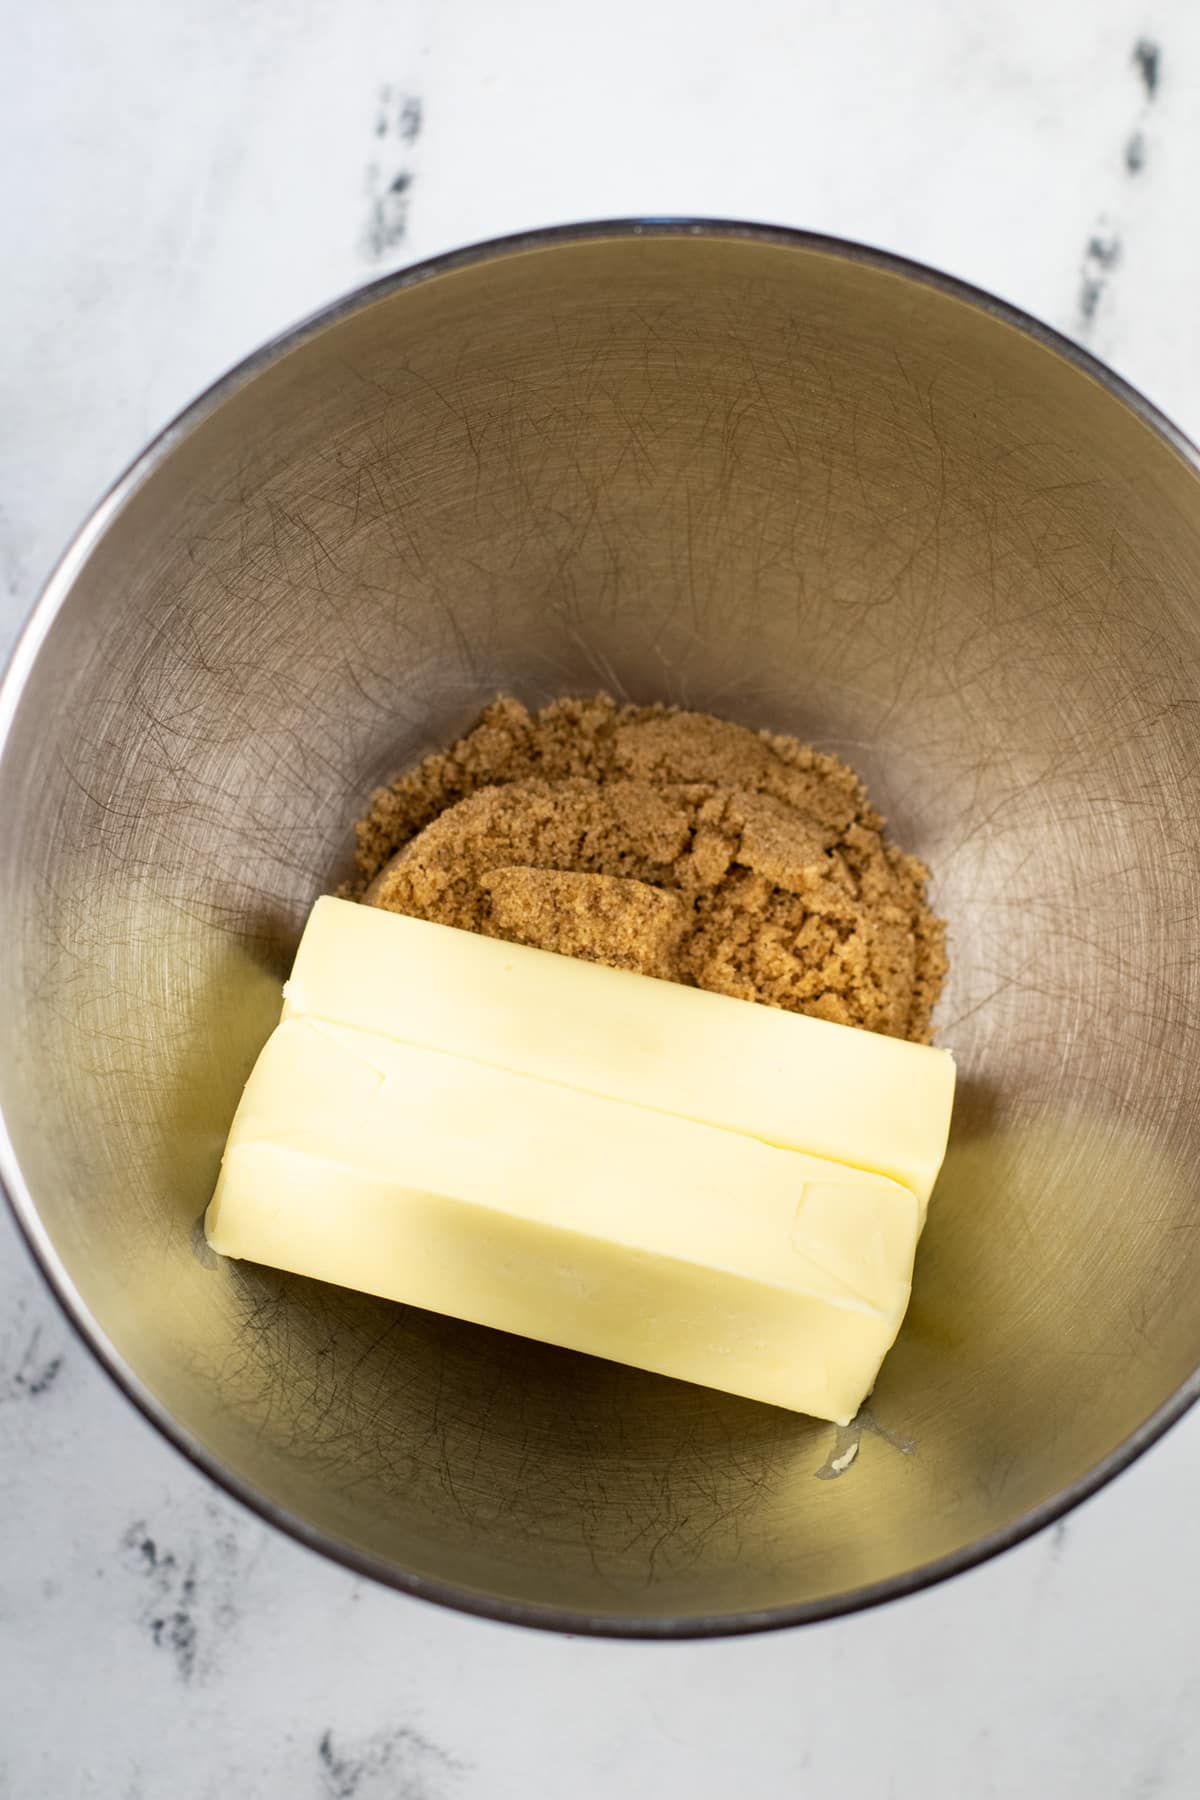 Brown sugar and butter in a mixer bowl